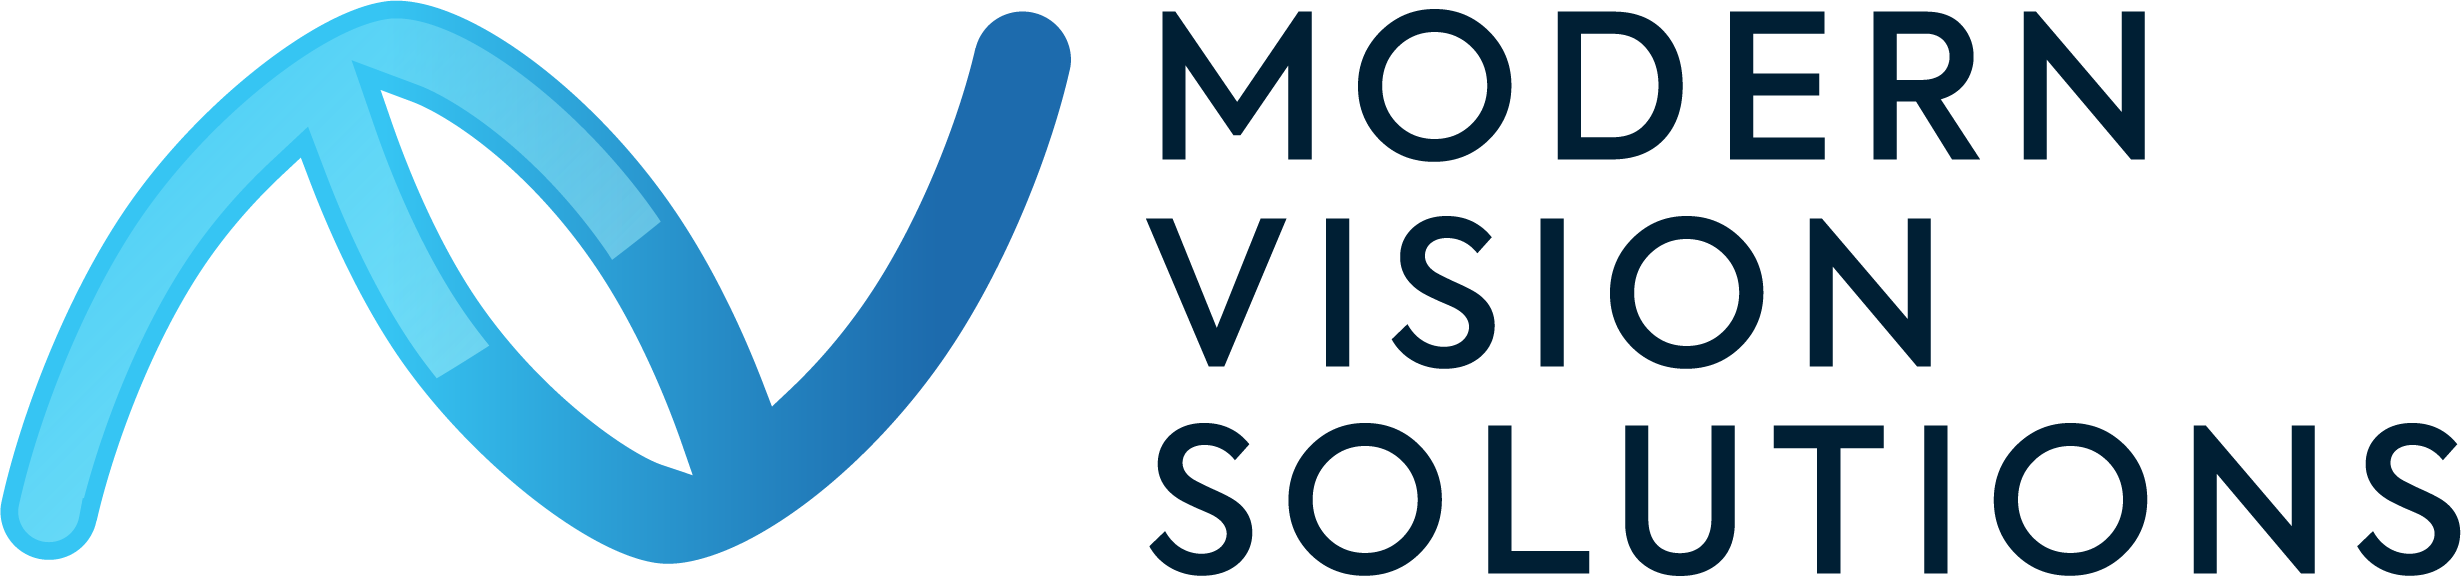 Modern Vision Solutions